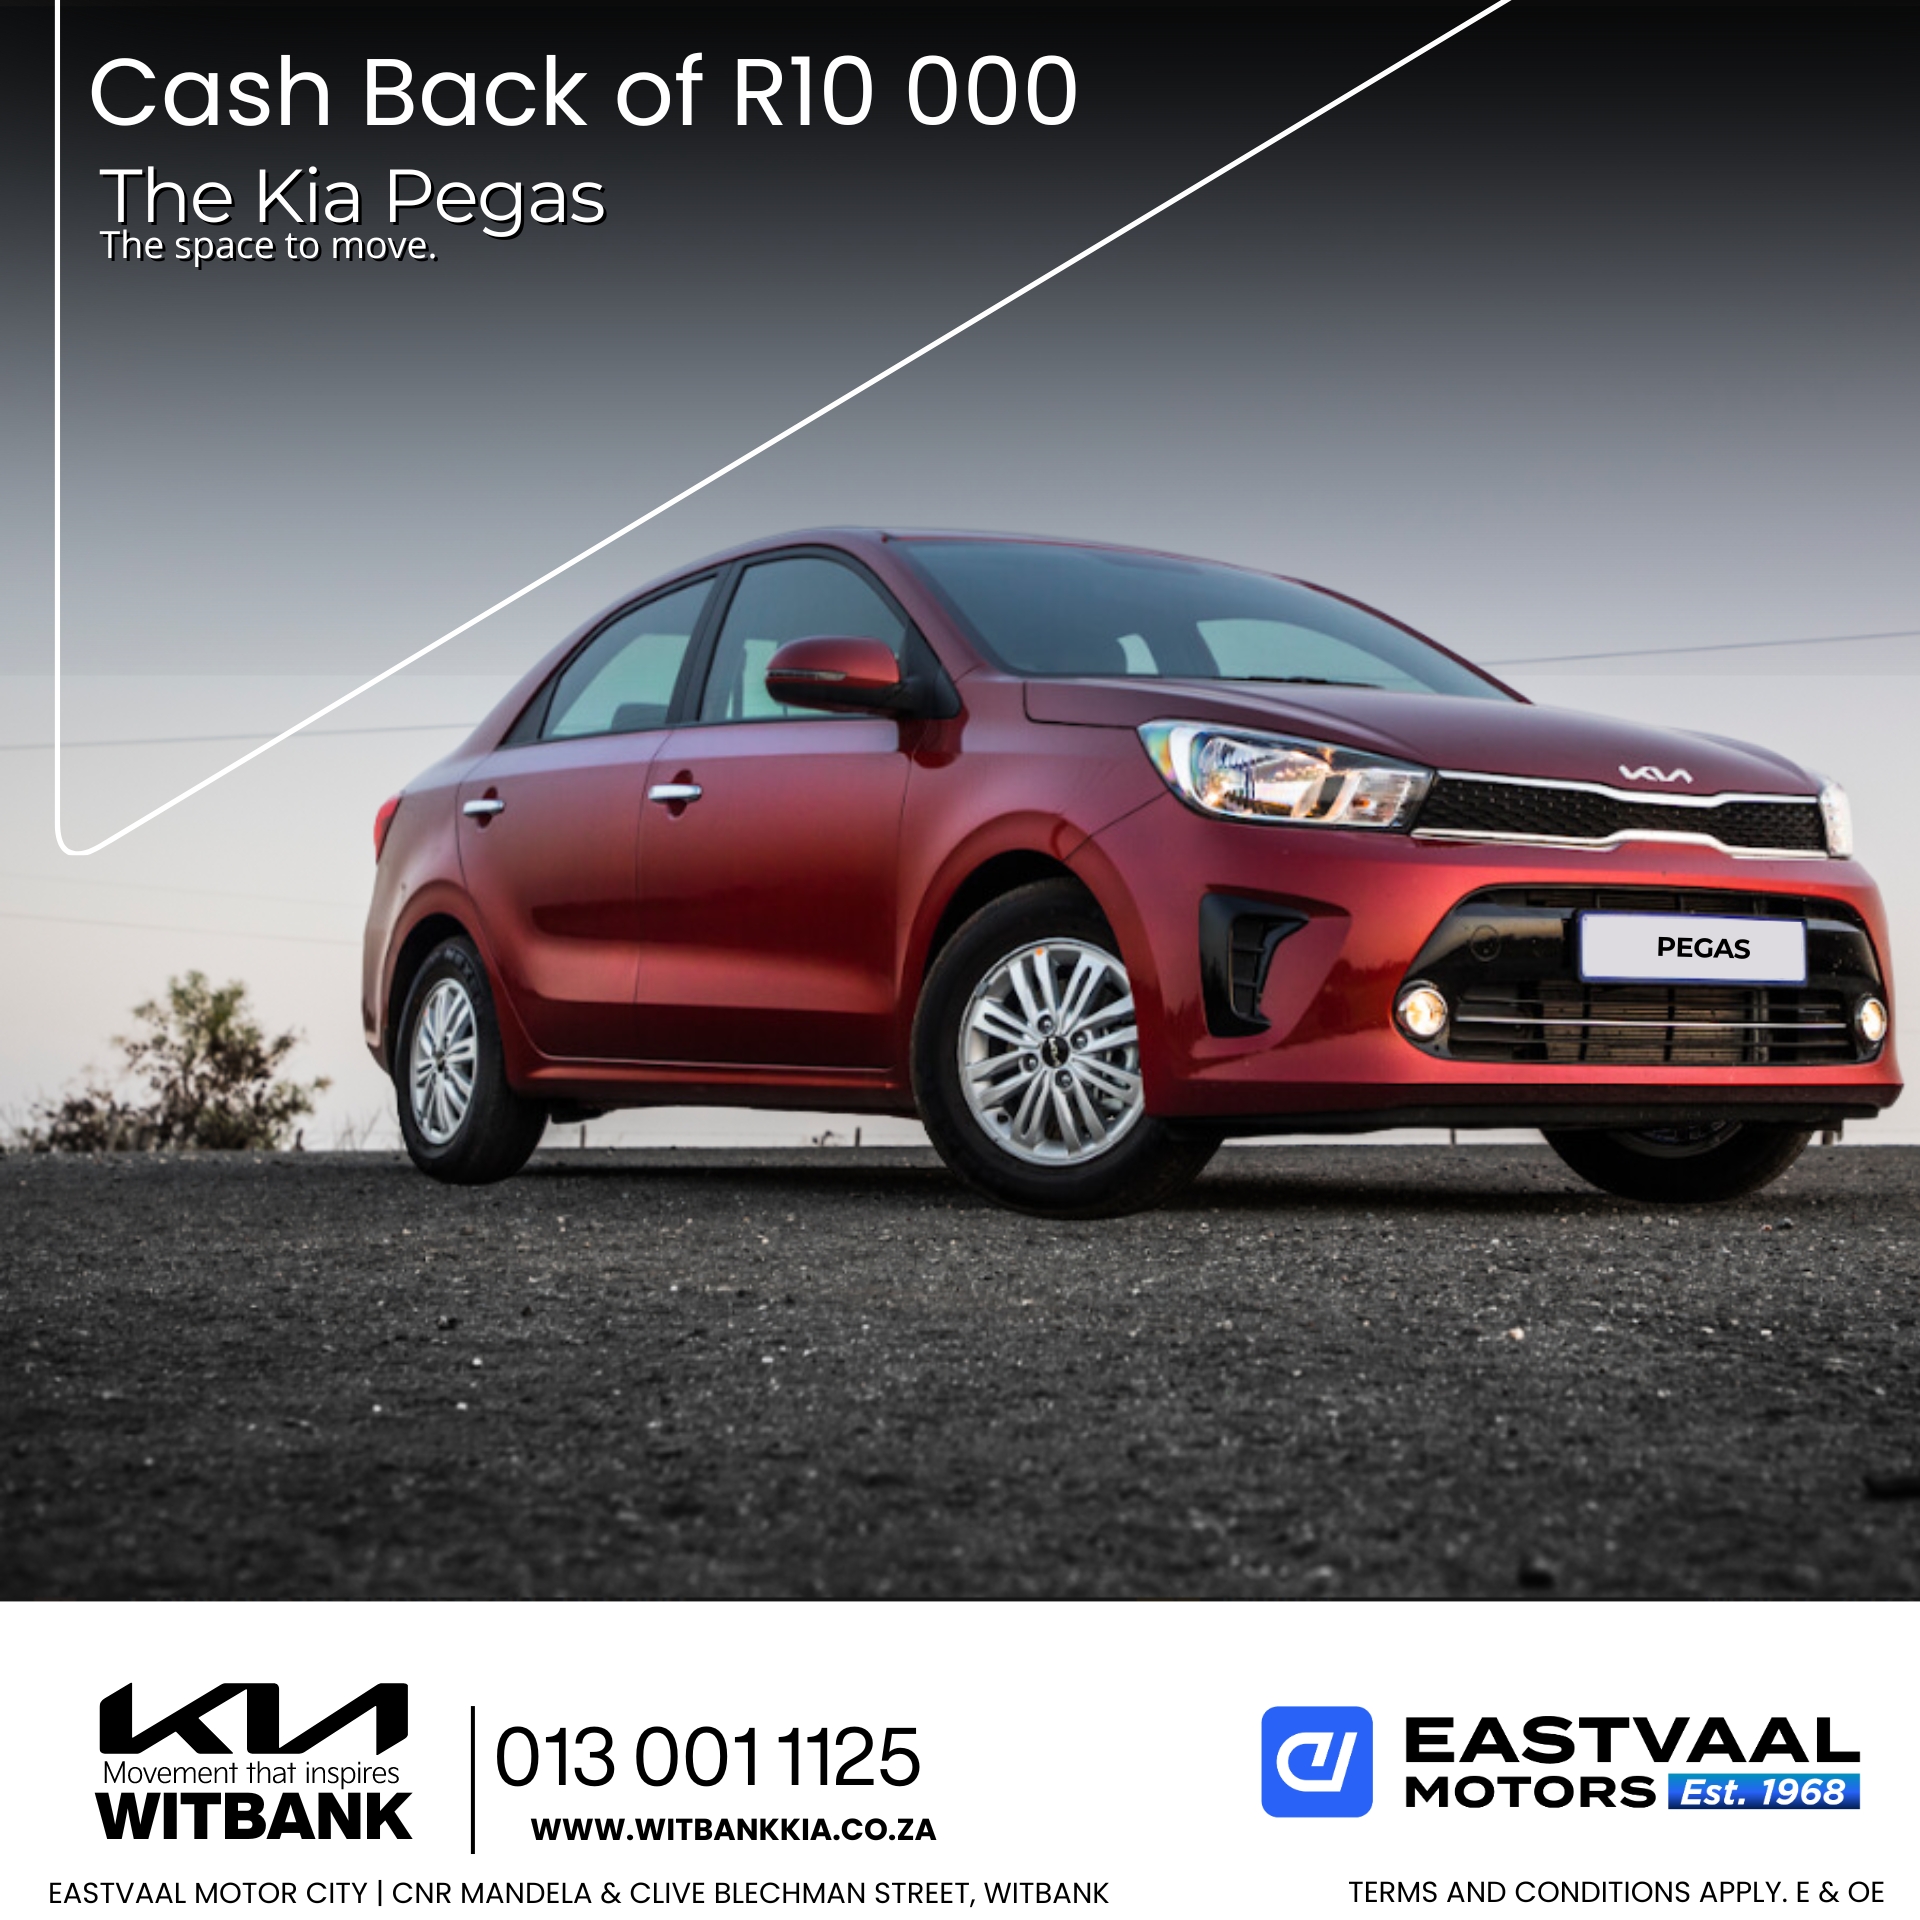 July is the perfect month to drive home a Kia. Explore our special offers at Eastvaal Motor City! image from 